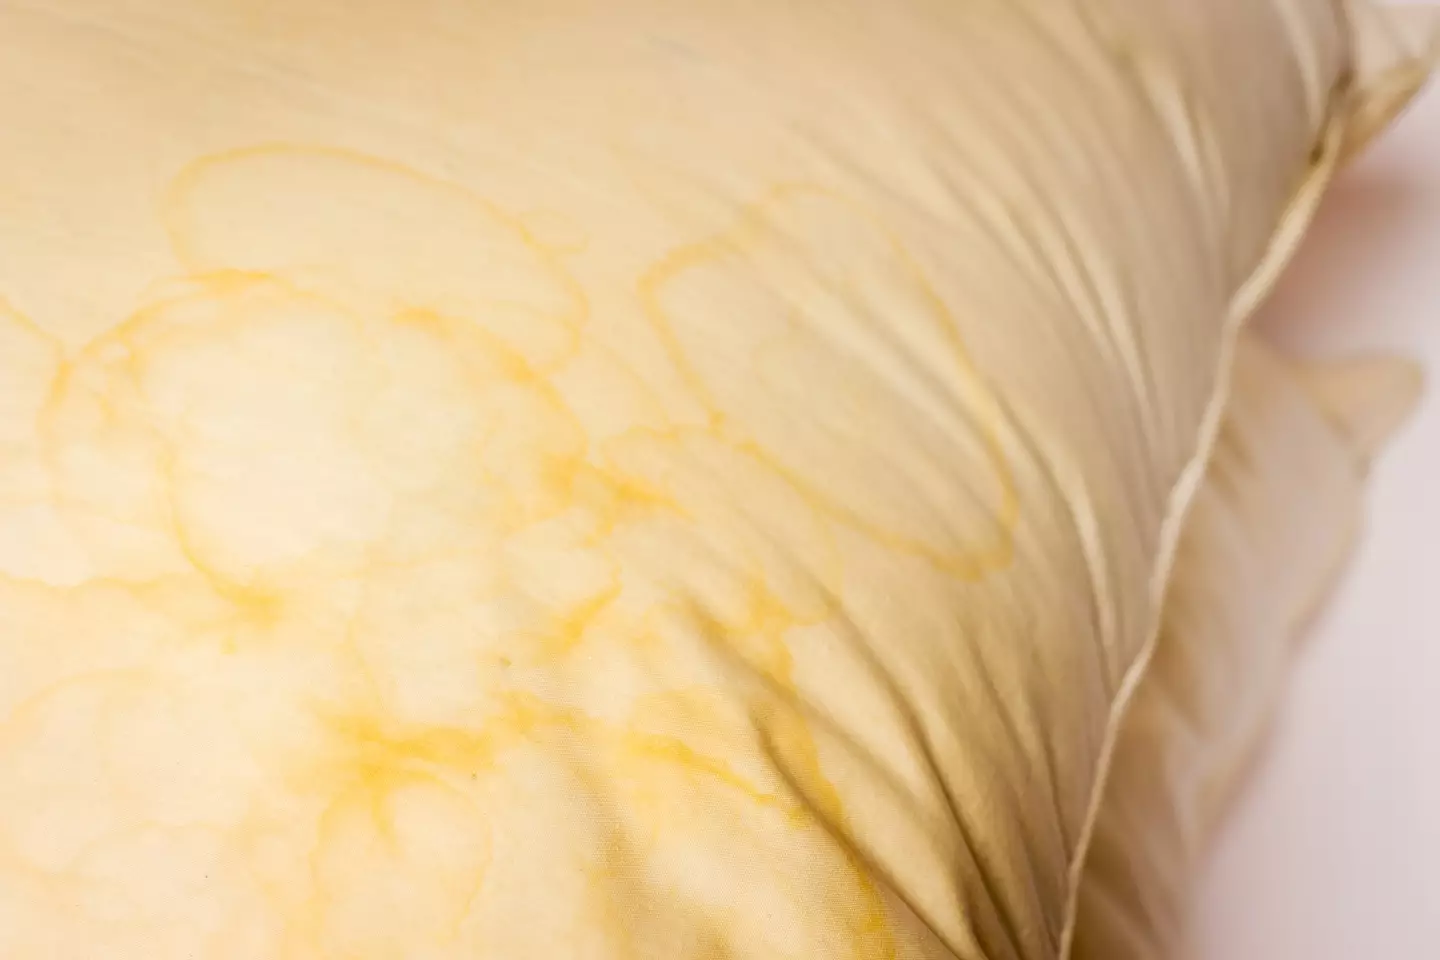 There's no night's sleep that compares to what The Yellow Pillow can provide.